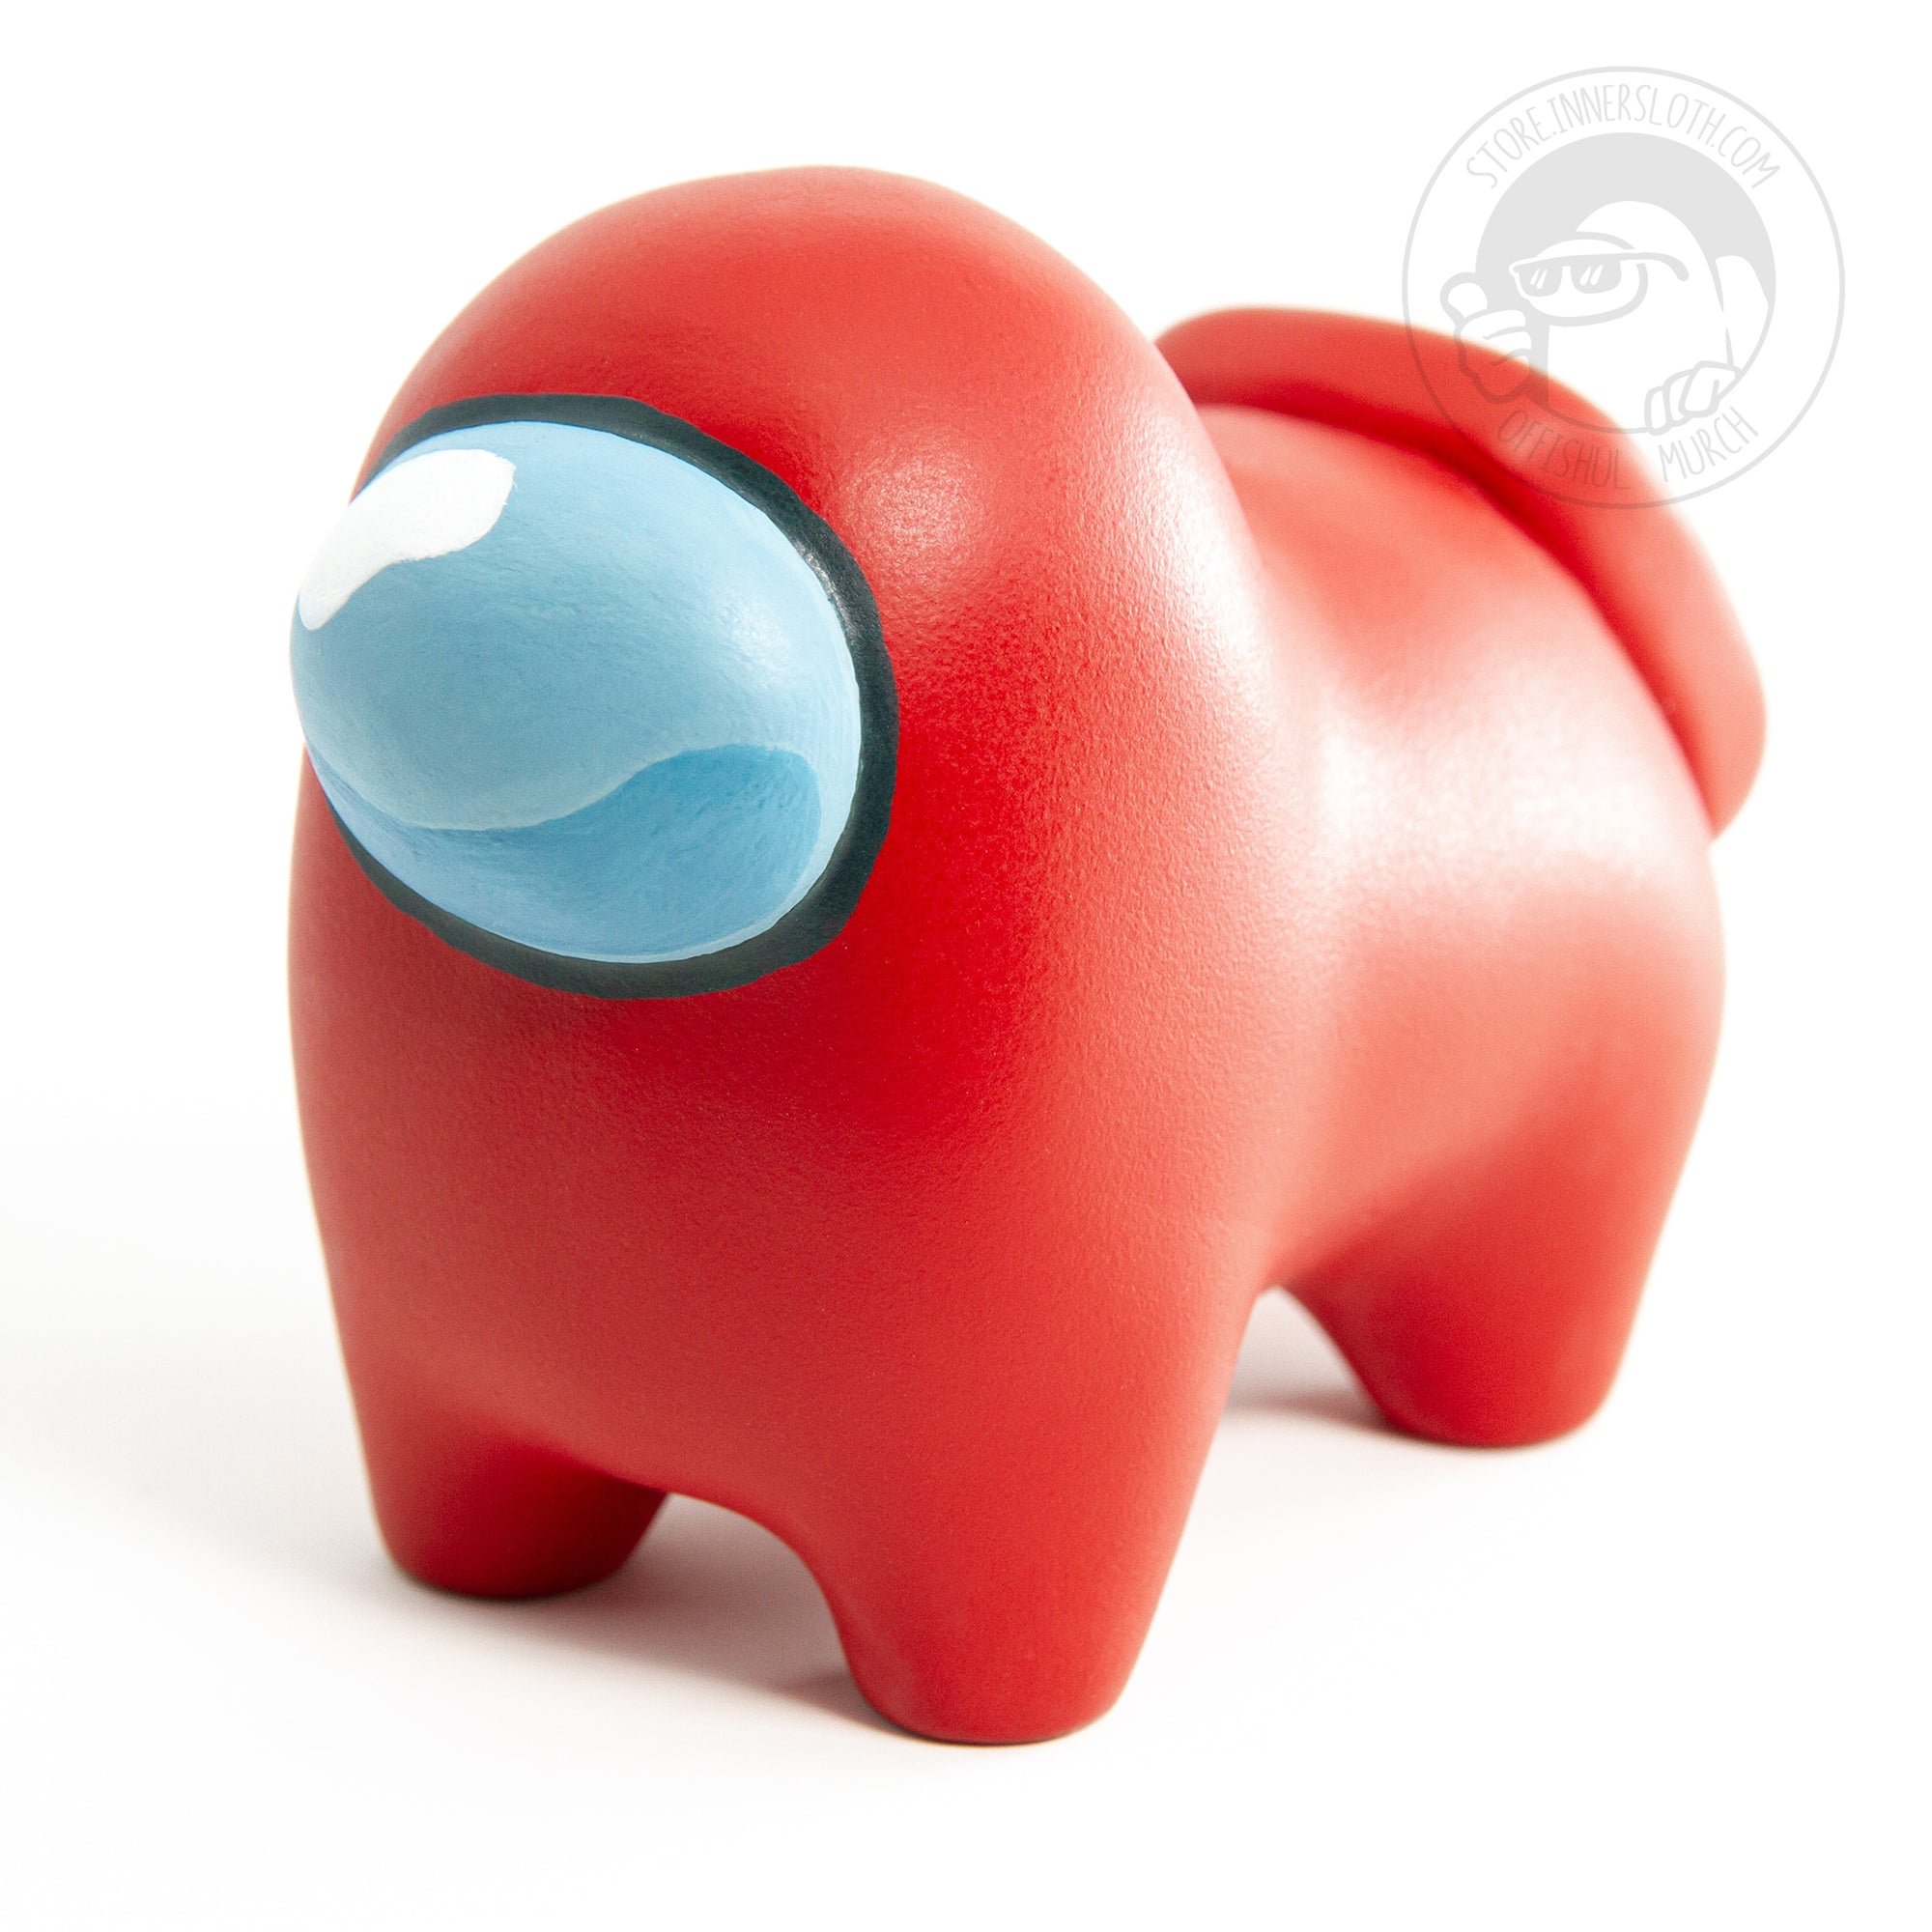 A photograph of the Crewgi Figurine from the front. Appearances are deceiving, as it looks like the Figurine has only two legs from this angle. The figurine is red, and the shining blue visor is lovingly hand painted.